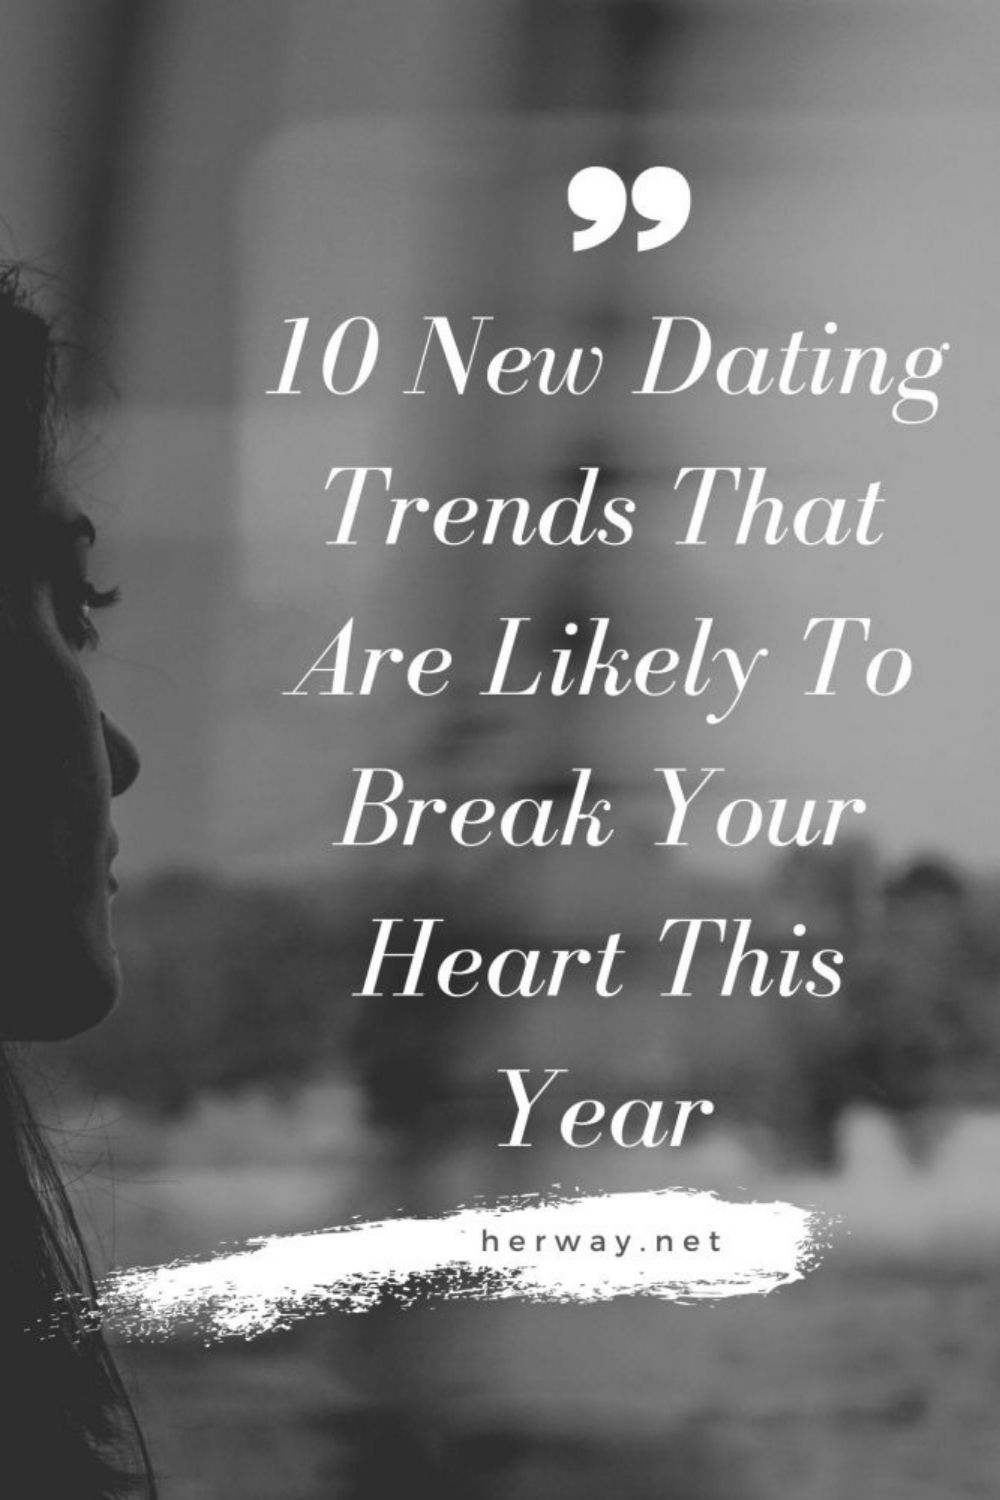 10 New Dating Trends That Are Likely To Break Your Heart This Year